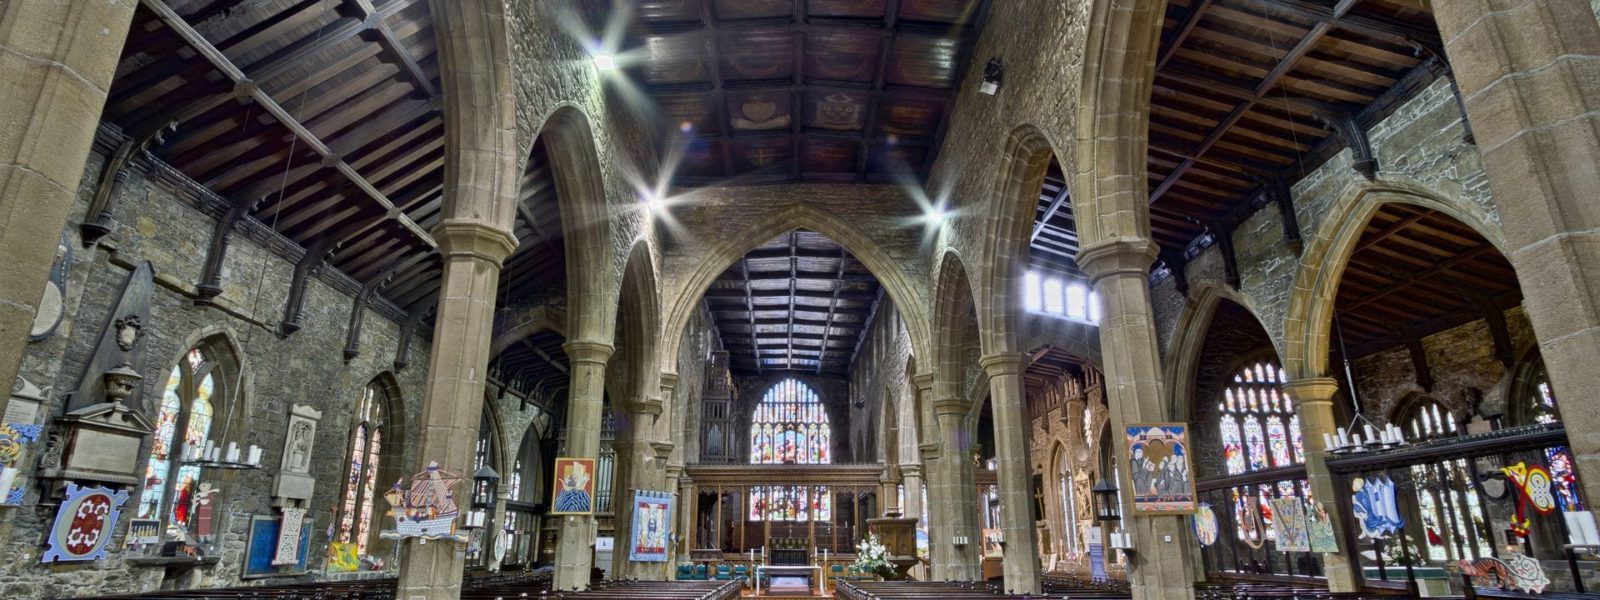 Why is it difficult to heat old churches with fans?